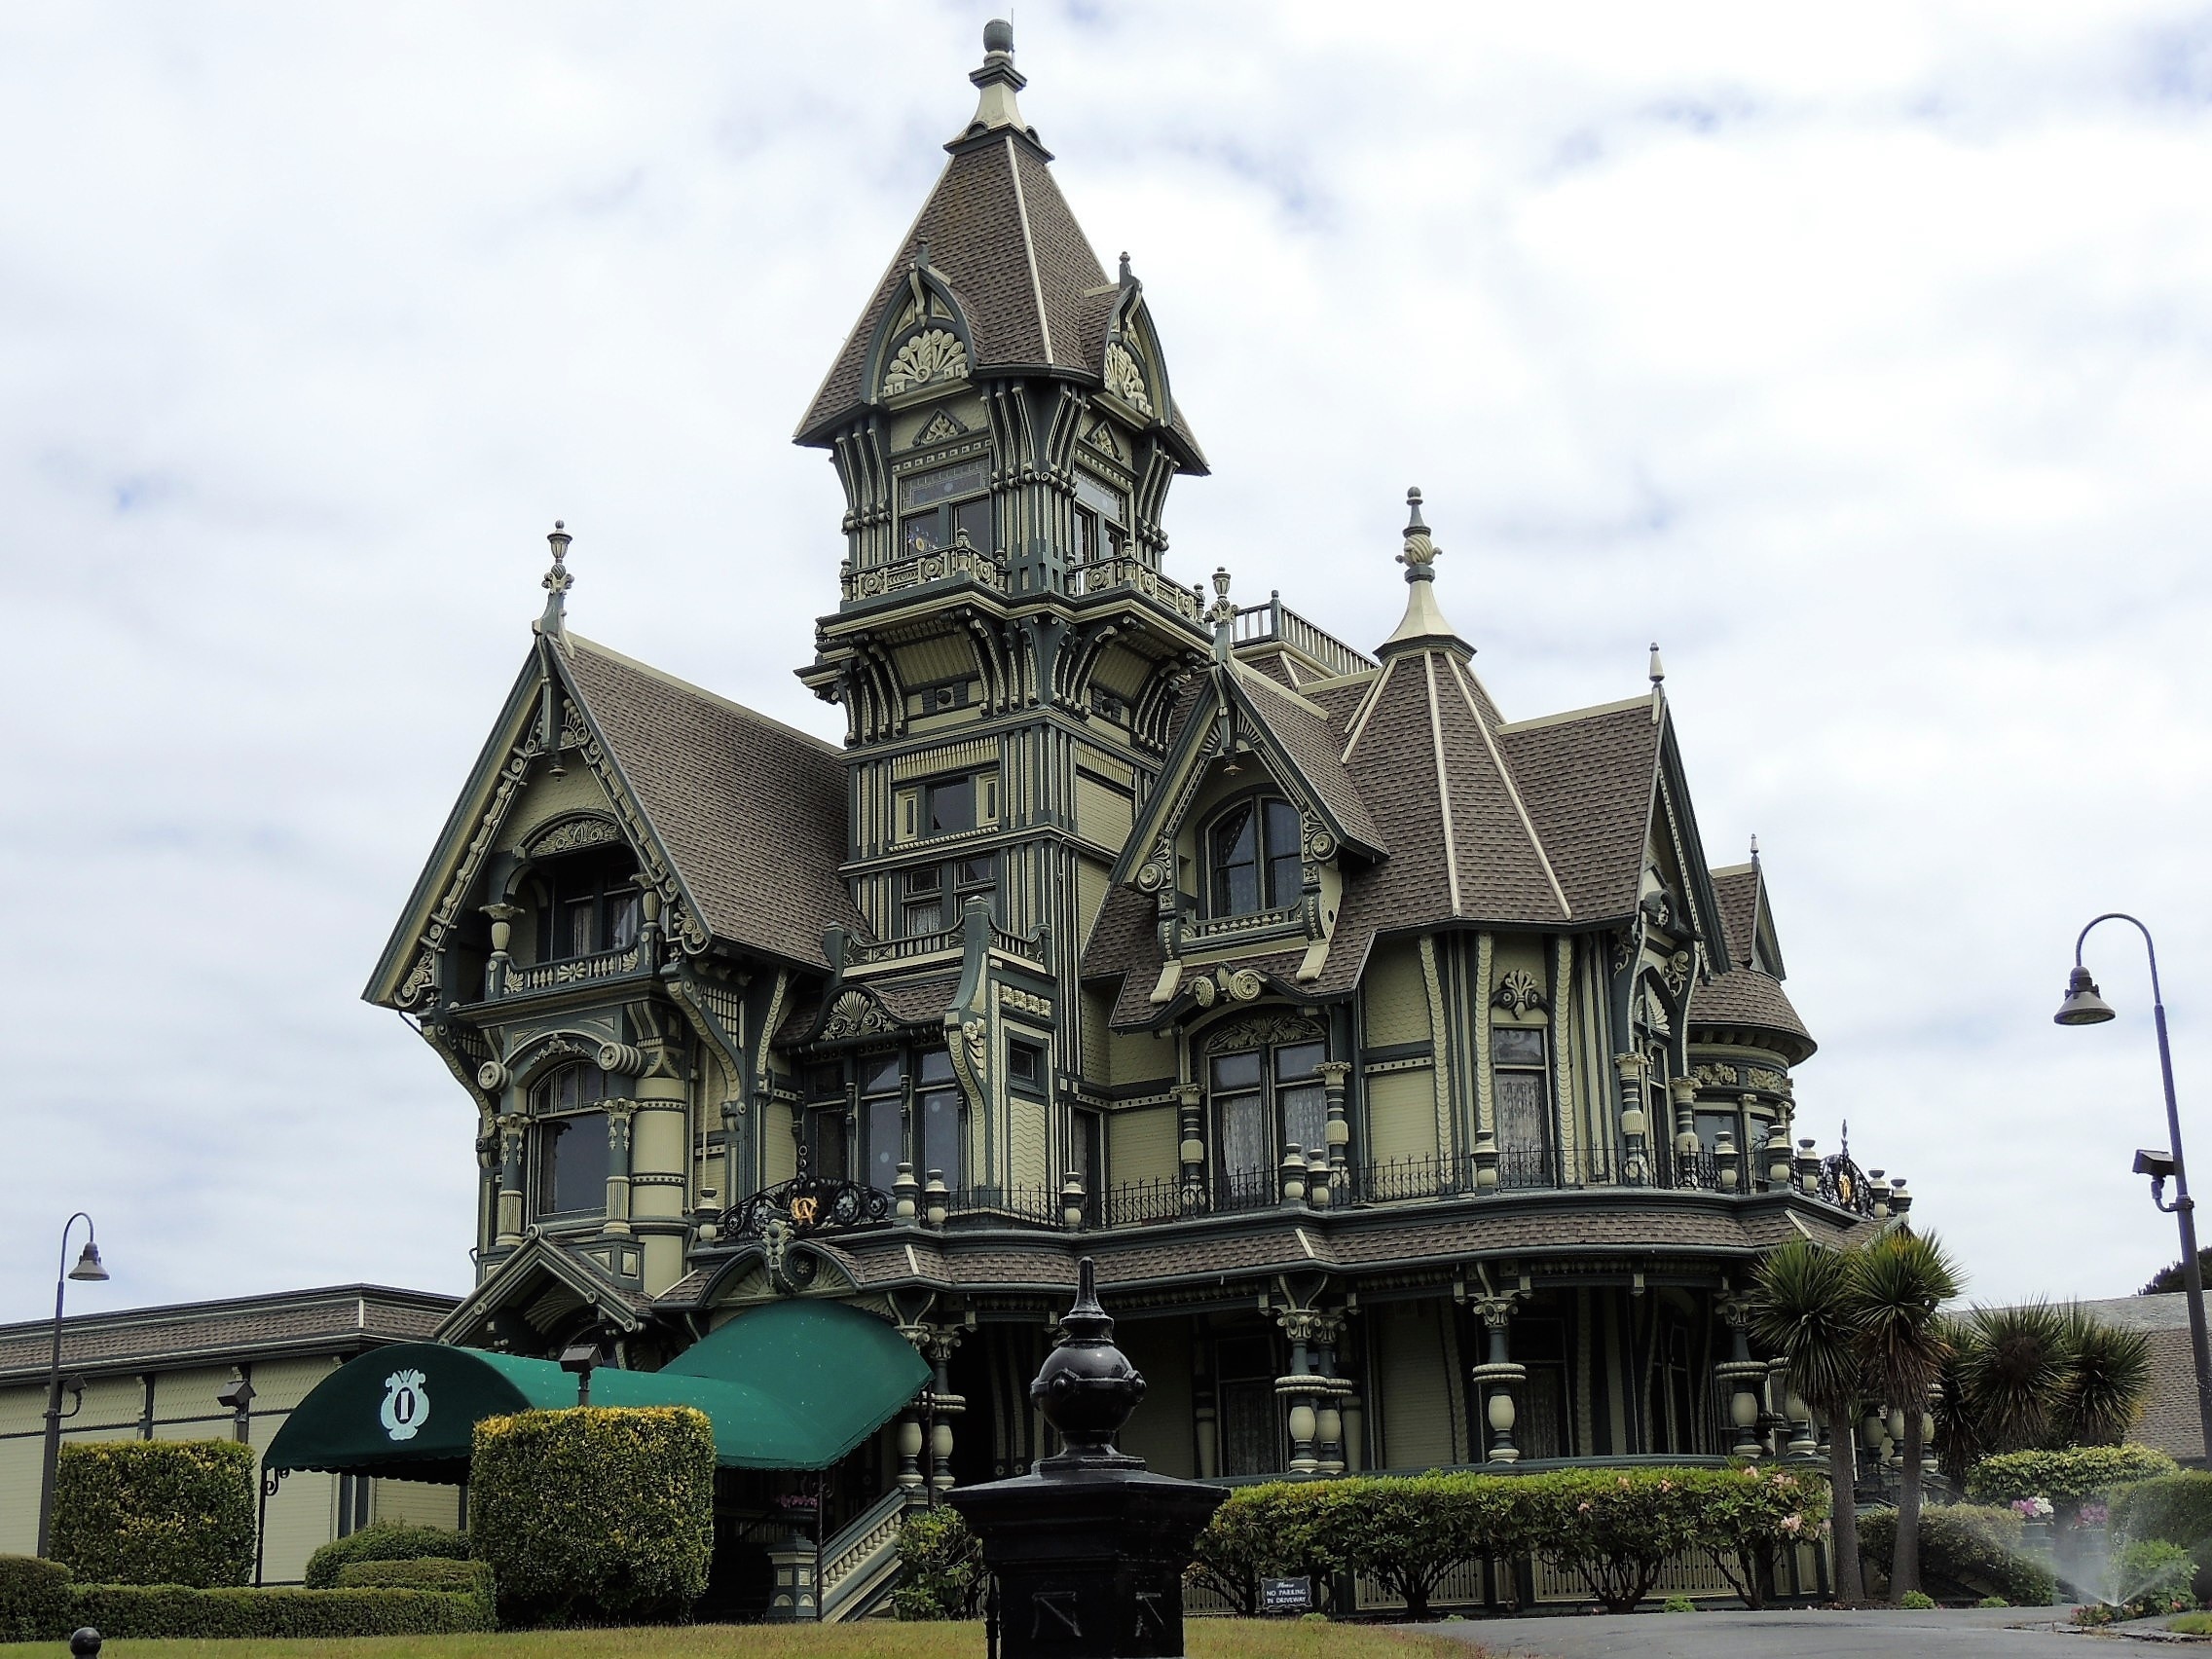 The Ingomar Club is a private club in Eureka, California that owns and is based in the Carson Mansion, one of the most notable examples of Victorian architecture in the United States